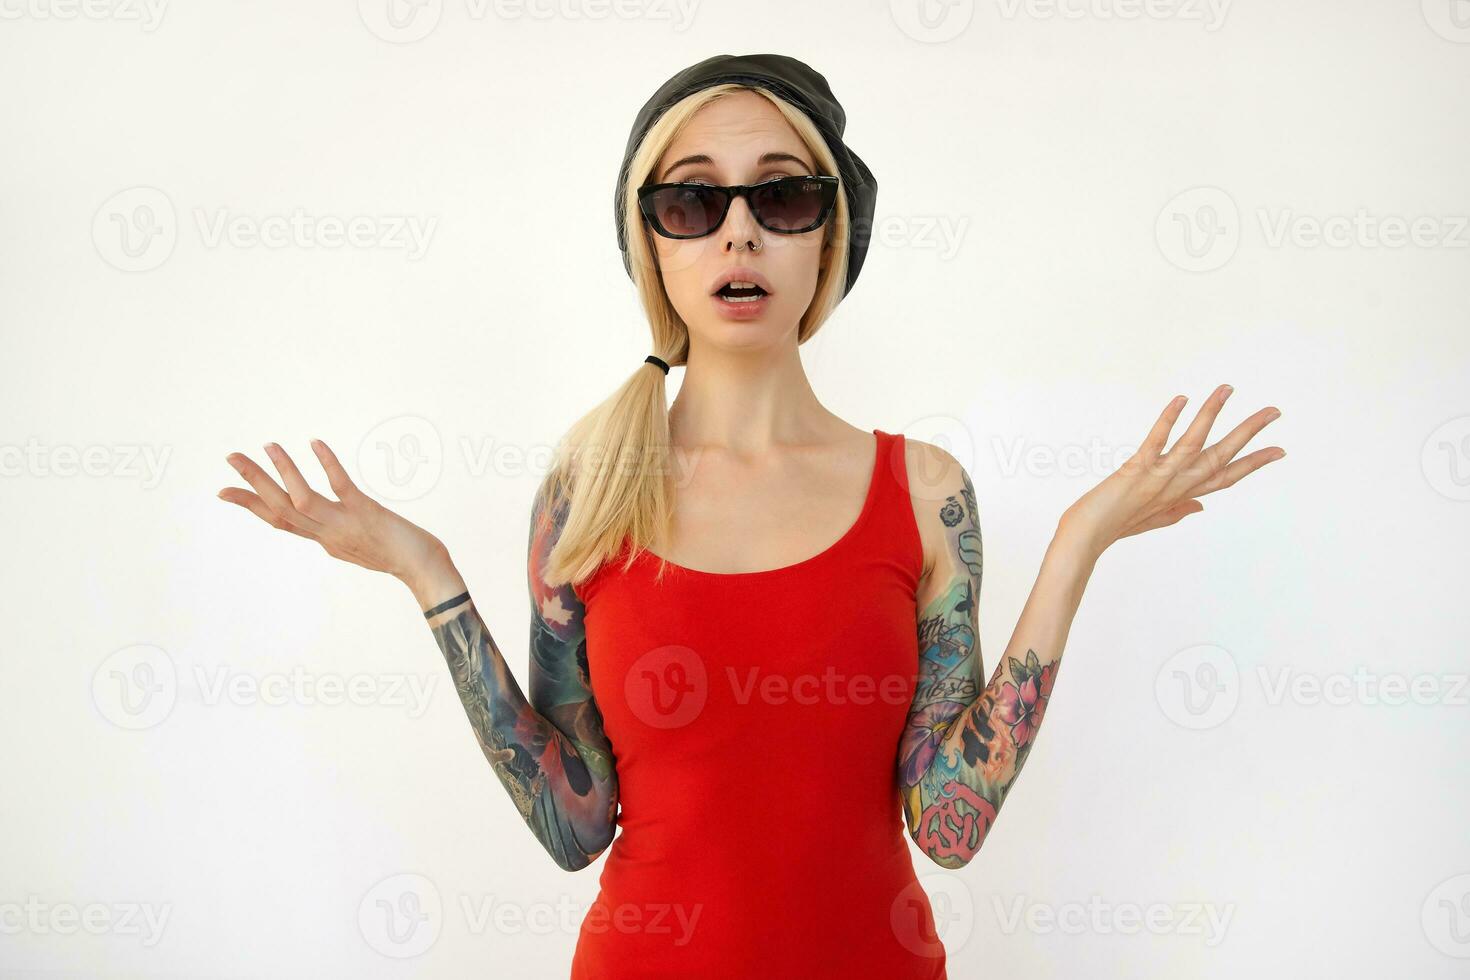 Puzzled young pretty blonde long haired woman with tattoos raising confusedly her hands while looking at camera, dressed in elegant clothes while posing over white background photo